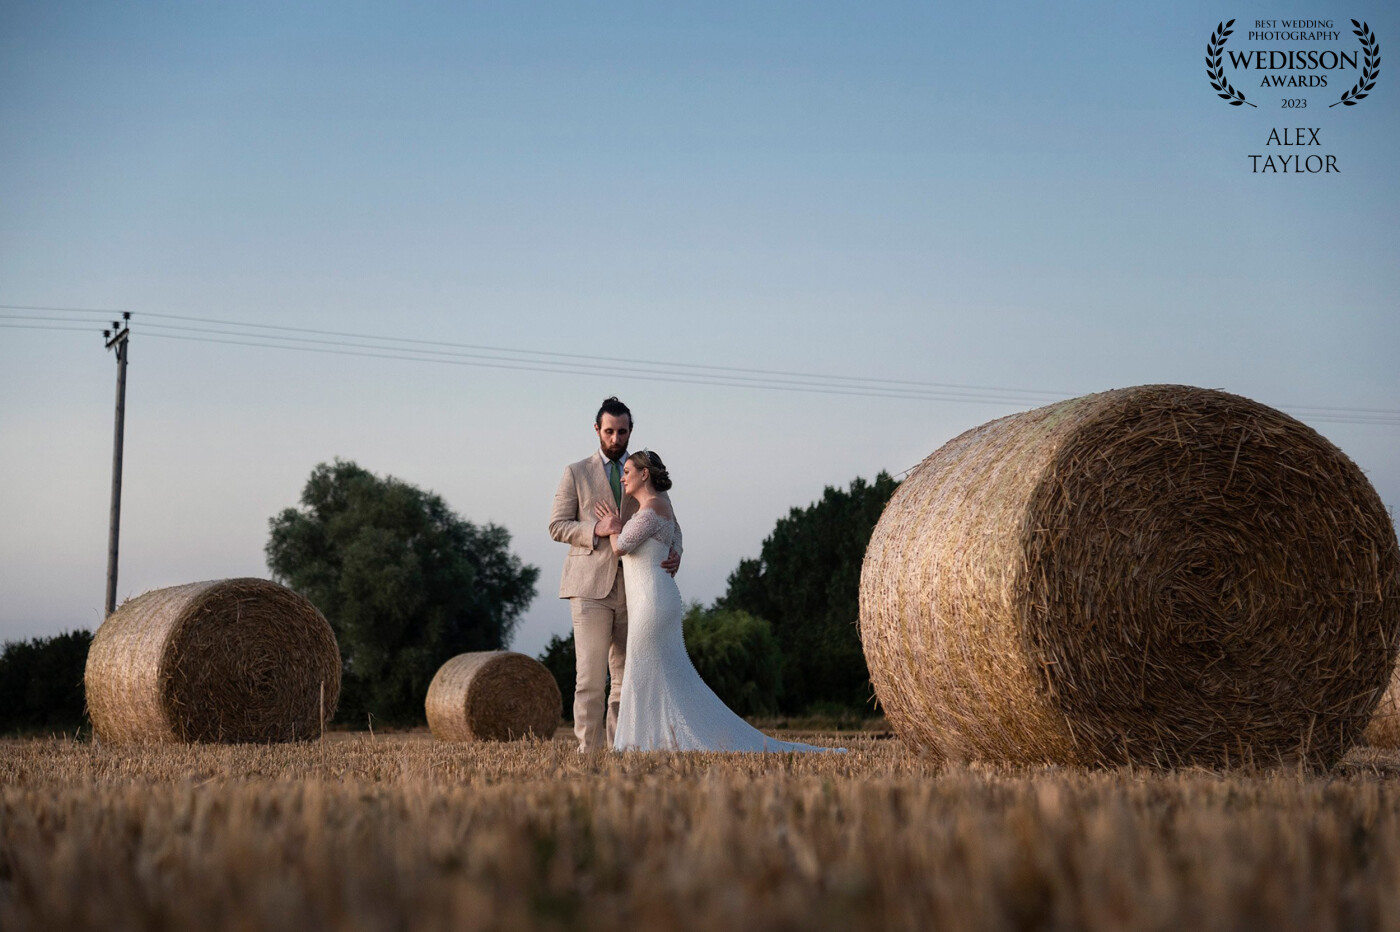 As the sun started to dip in the sky in the charming rural village of Cotton we headed out to a nearby field for a peaceful moment to catch the last of the rays amongst the hay bales.